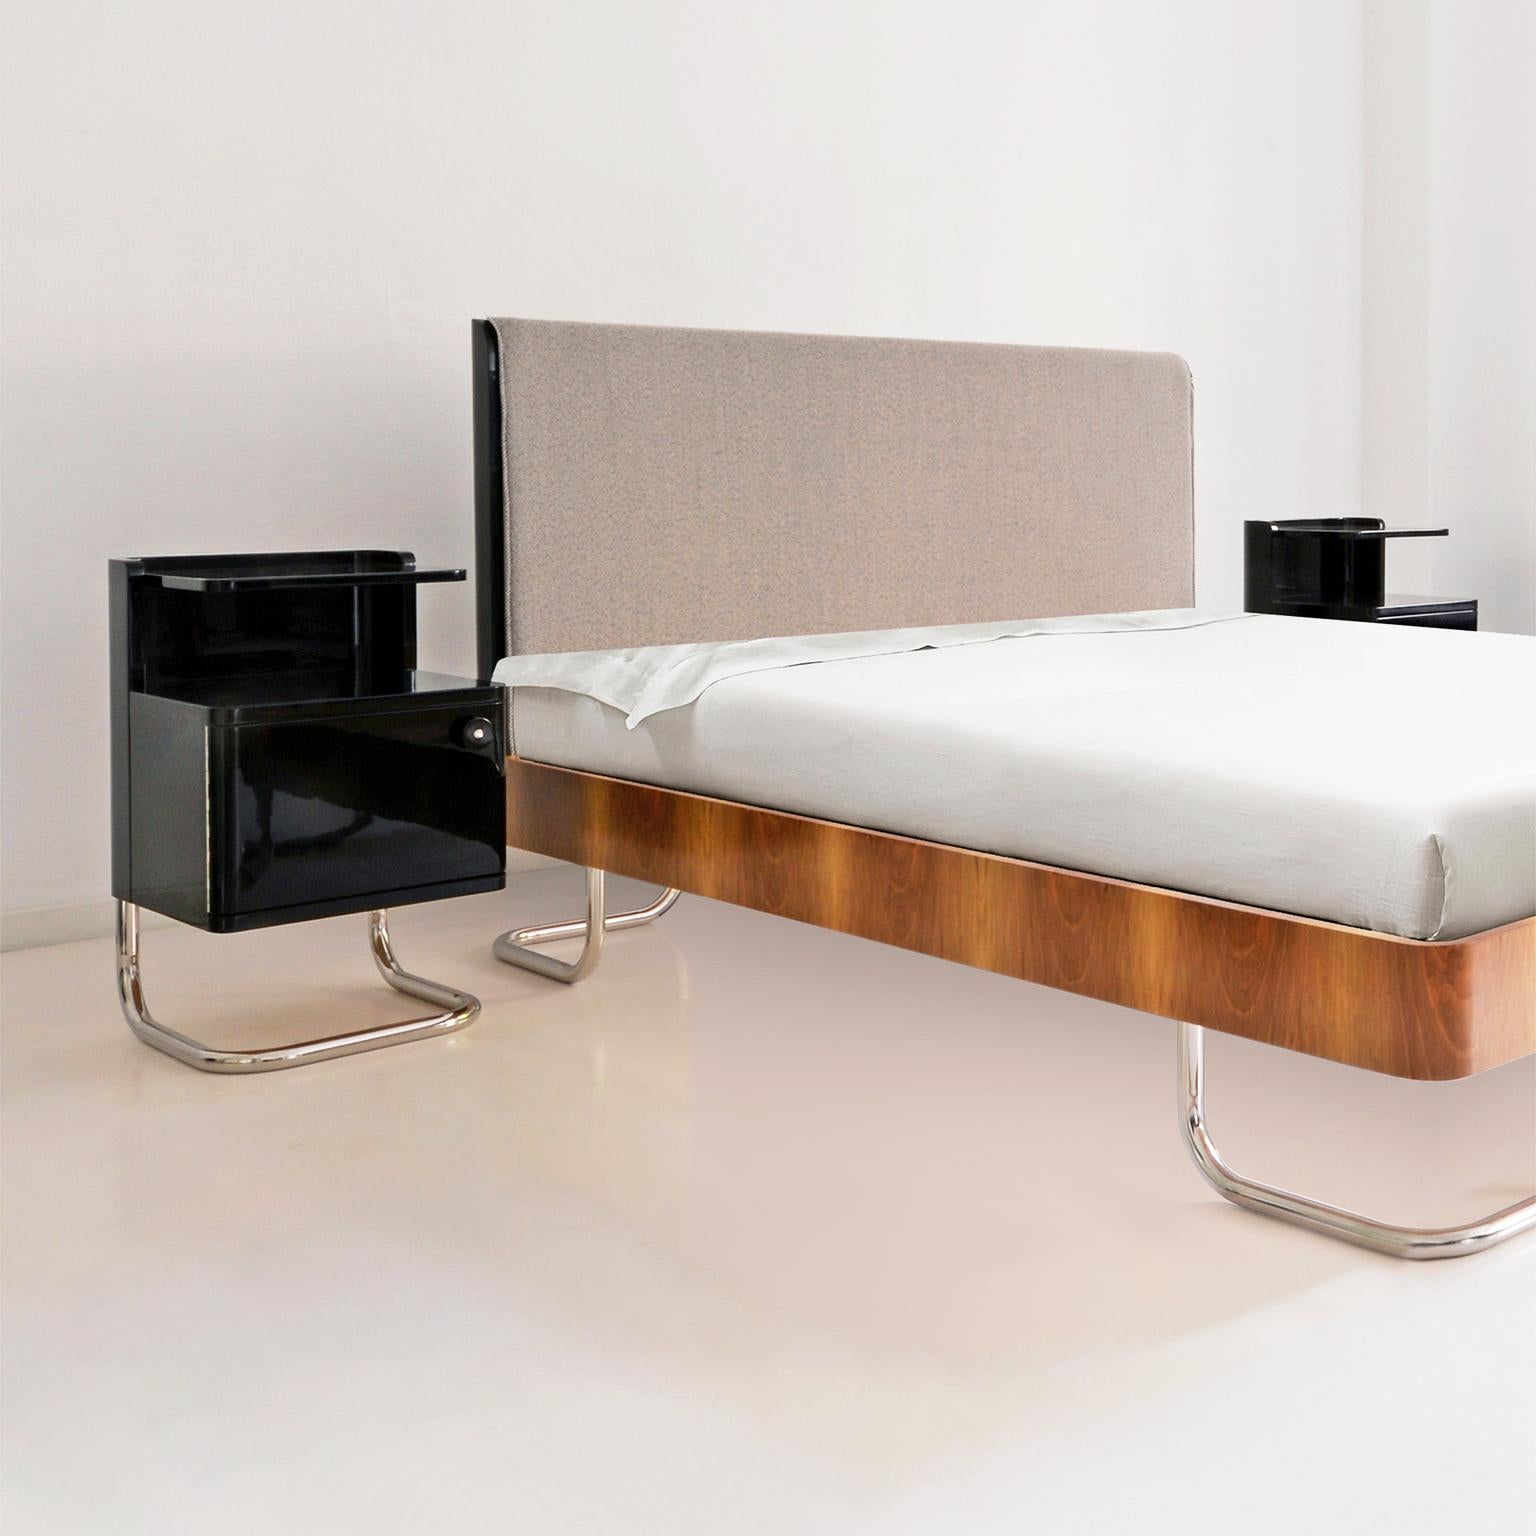 German Bespoke Modern Contemporary Double Bed with Bedside Cabinets in Handcrafted Wood For Sale